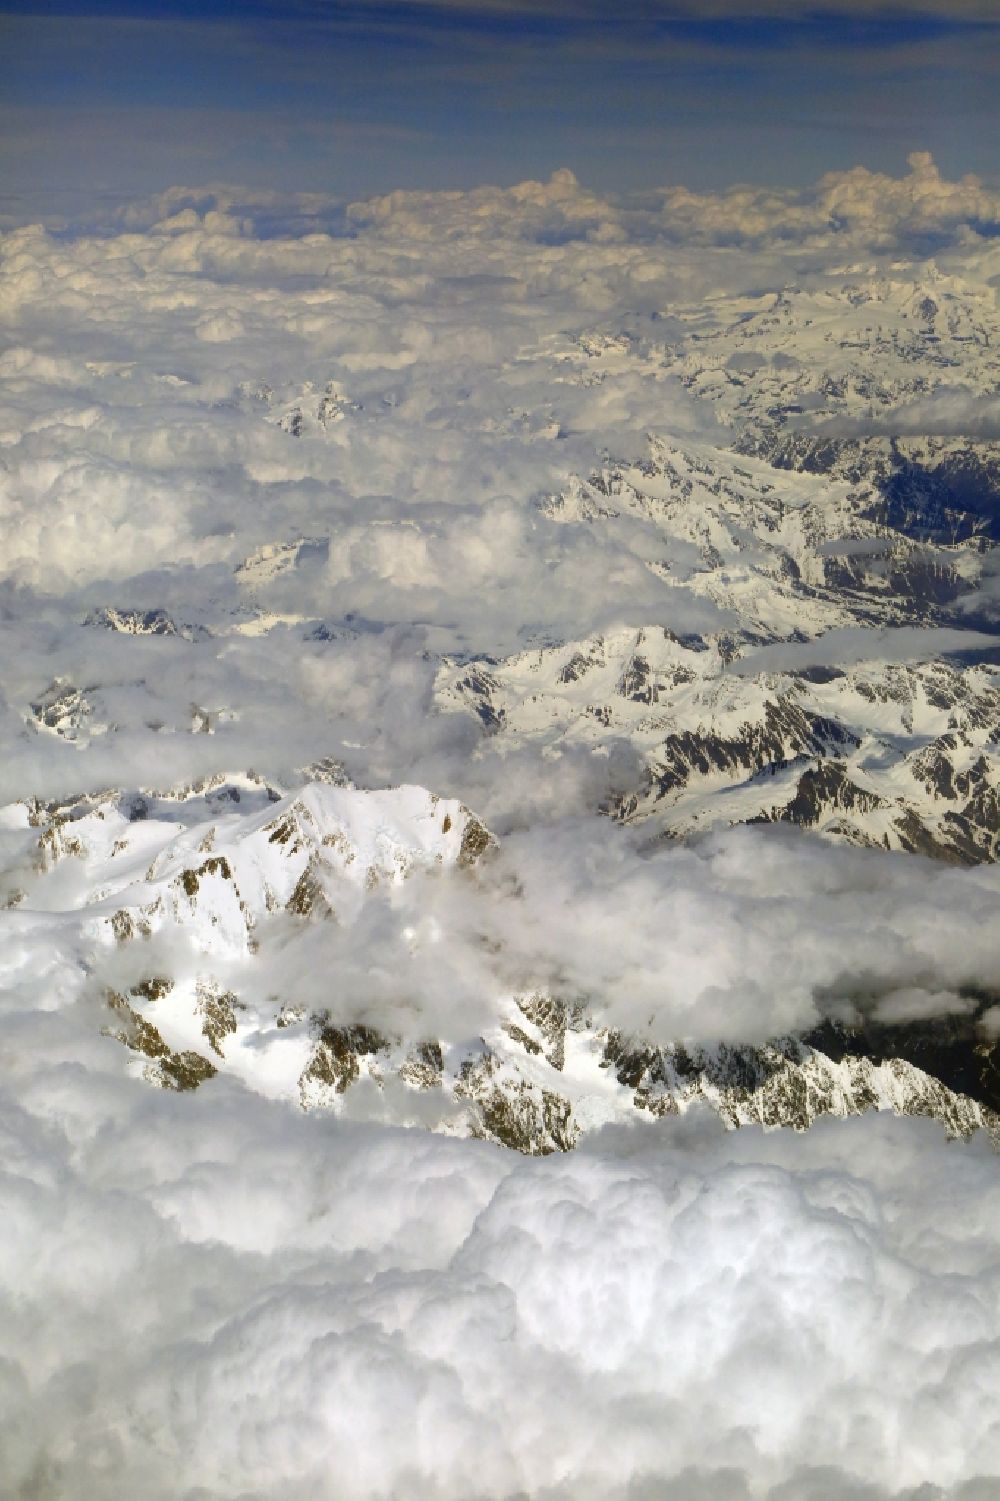 Chamonix-Mont-Blanc from above - Clouds over the rock and mountain landscape in the high alps in Chamonix-Mont-Blanc in Auvergne-Rhone-Alpes, France